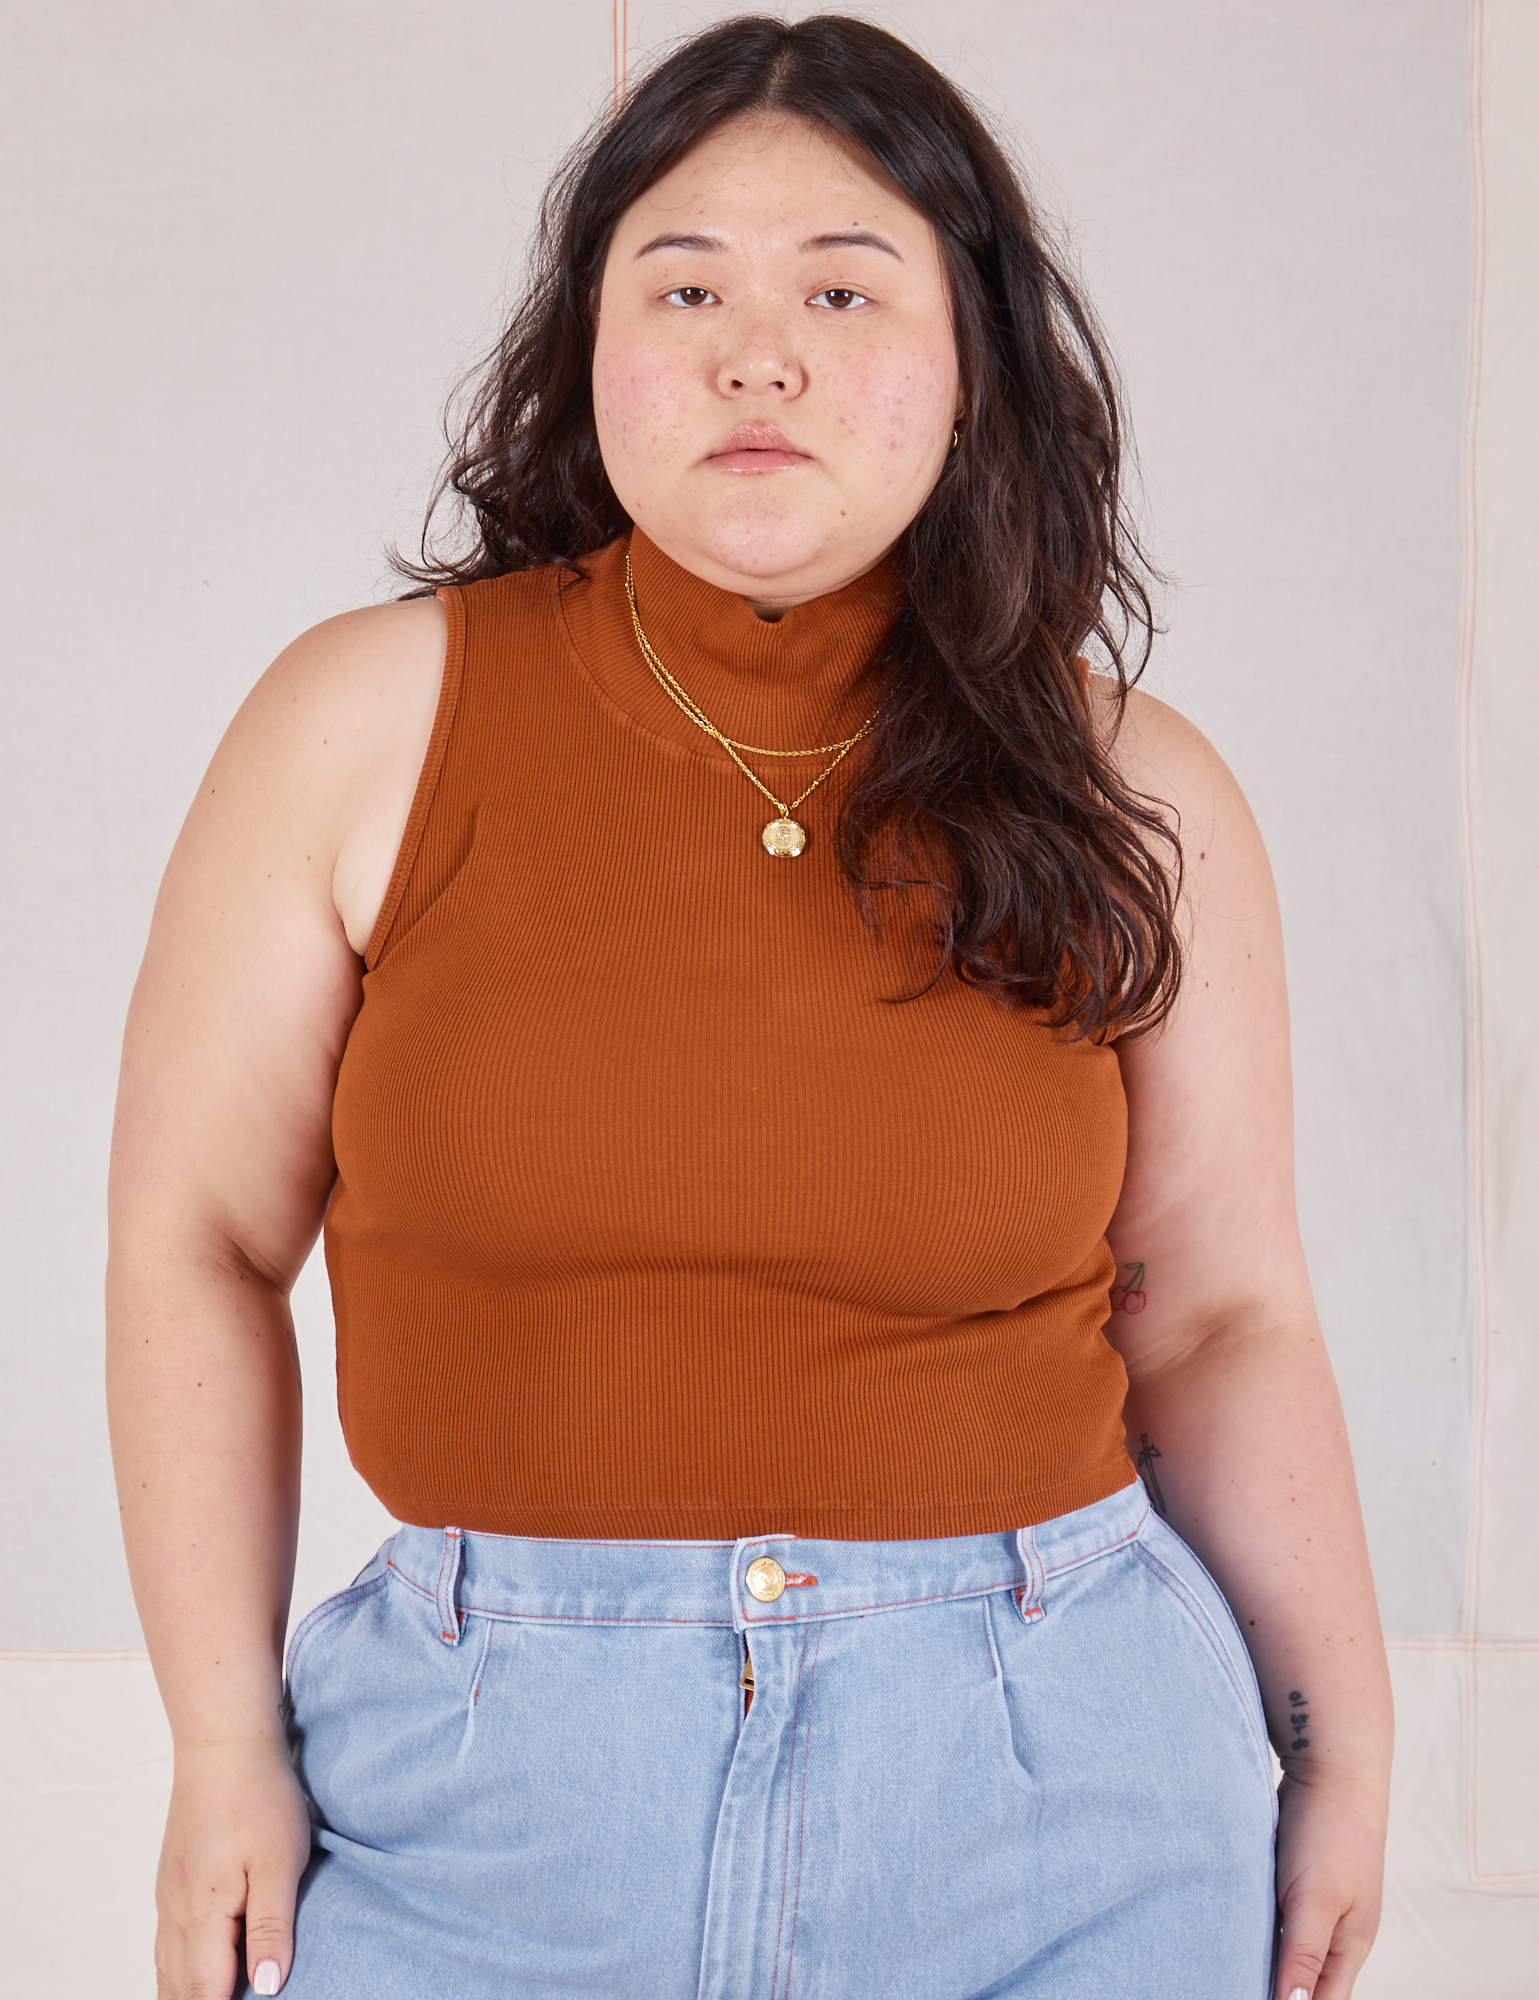 Ashley is 5'7" and wearing L Sleeveless Essential Turtleneck in Burnt Terracotta